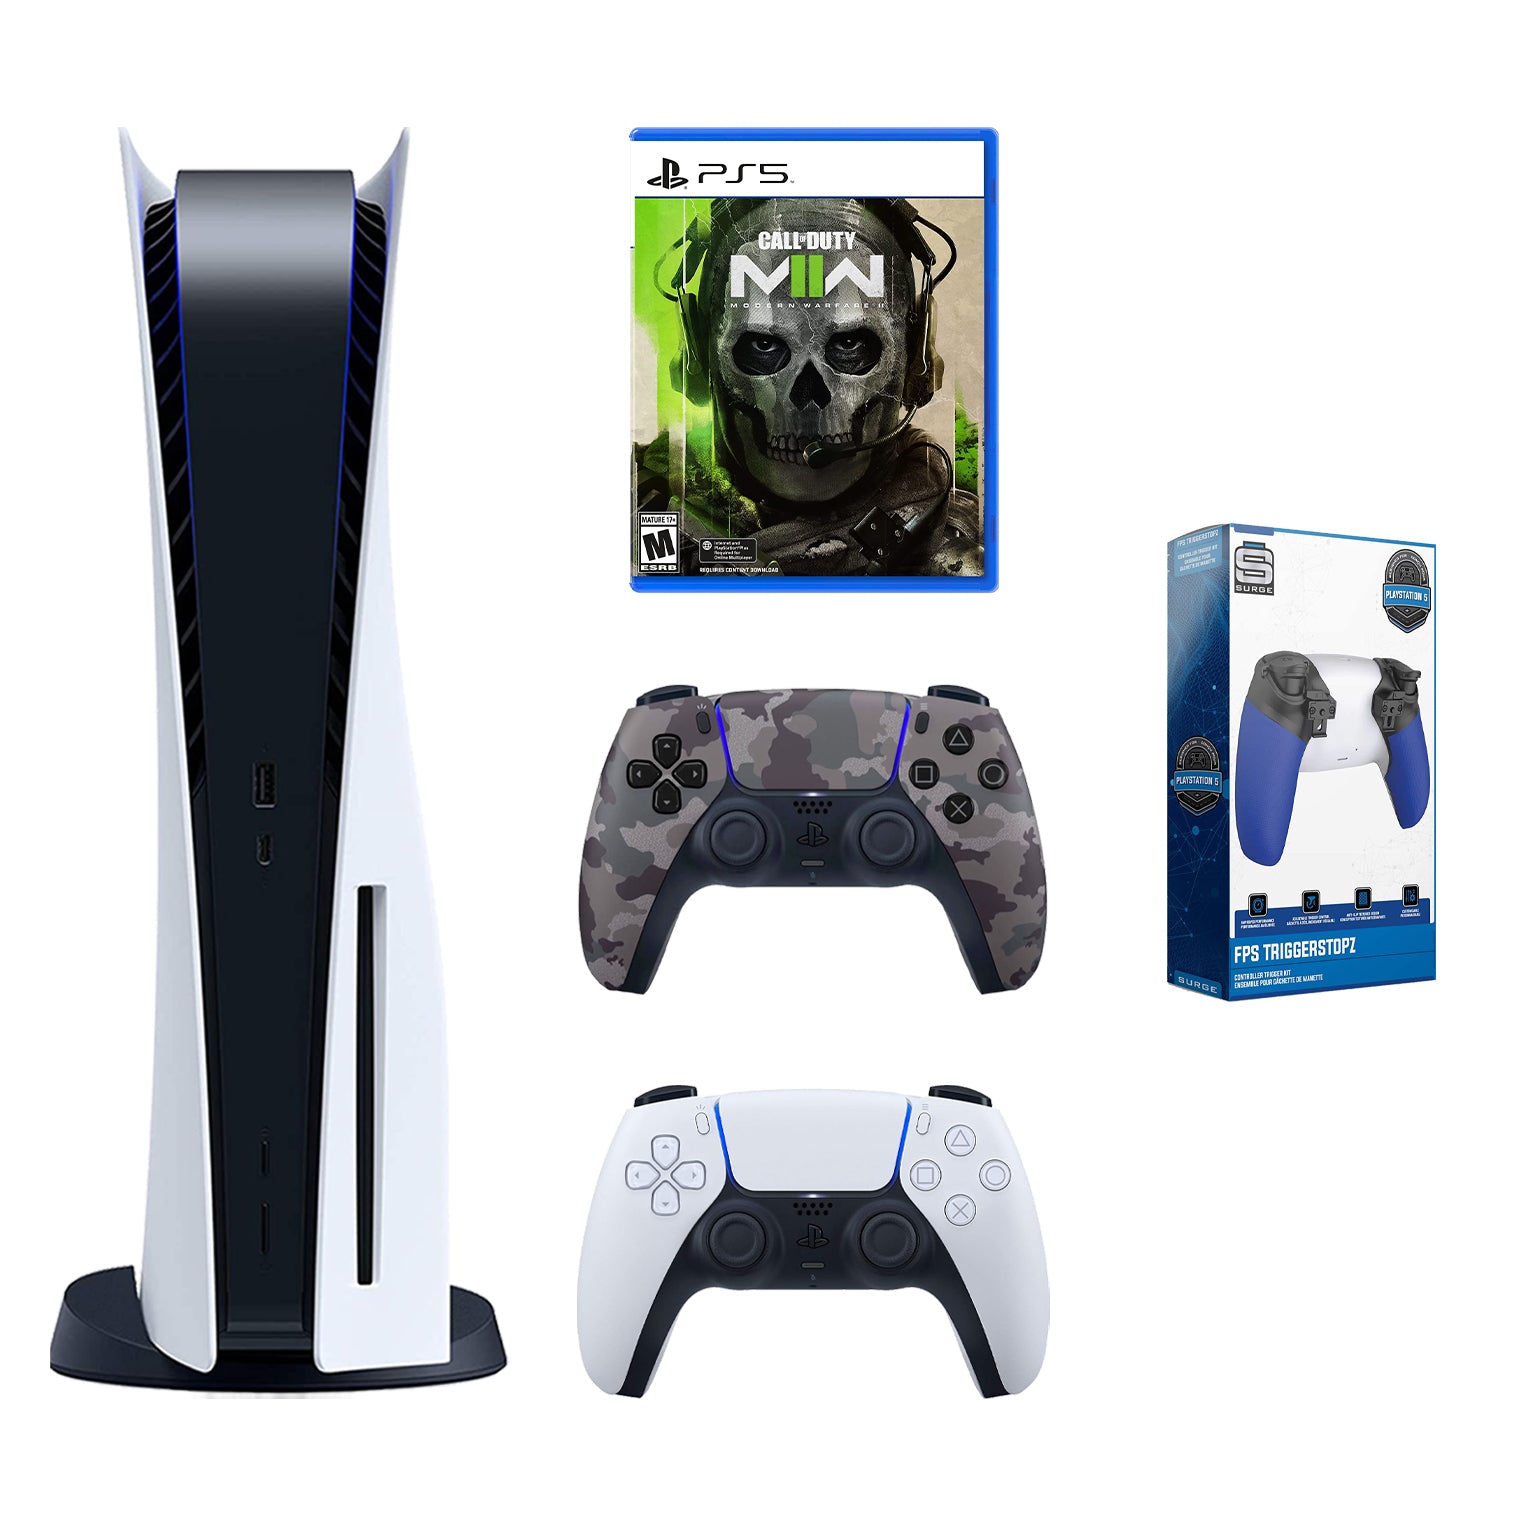 Sony Playstation 5 Disc Bundle with Extra Gray Camo Controller, Call of Duty: Modern Warfare II and Surge Trigger Kit - Pro-Distributing